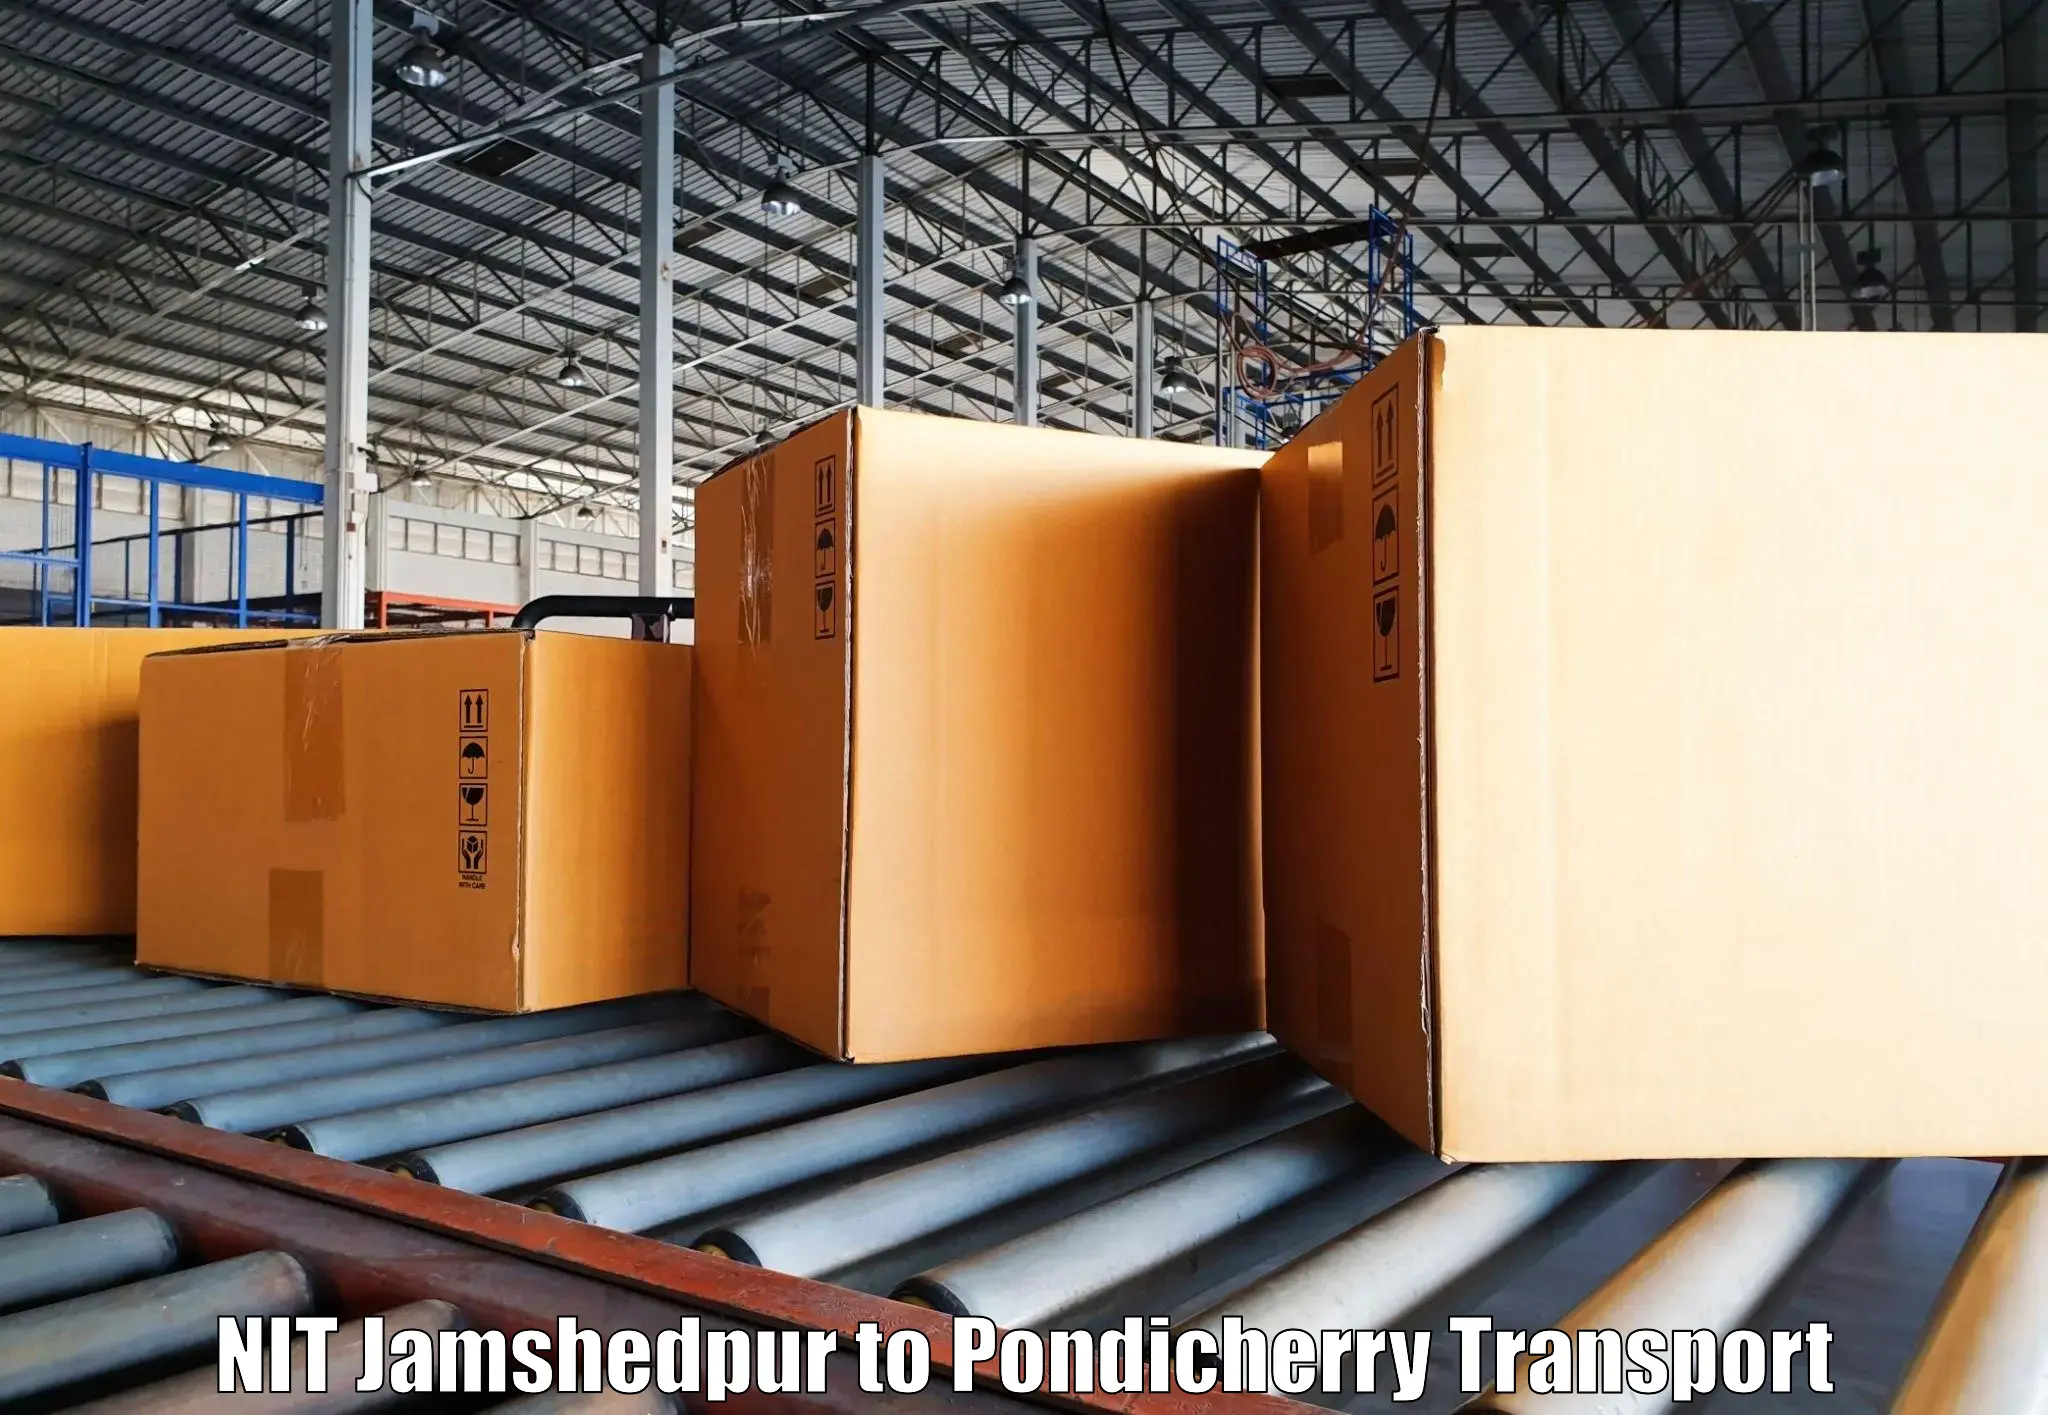 Transport bike from one state to another NIT Jamshedpur to Pondicherry University